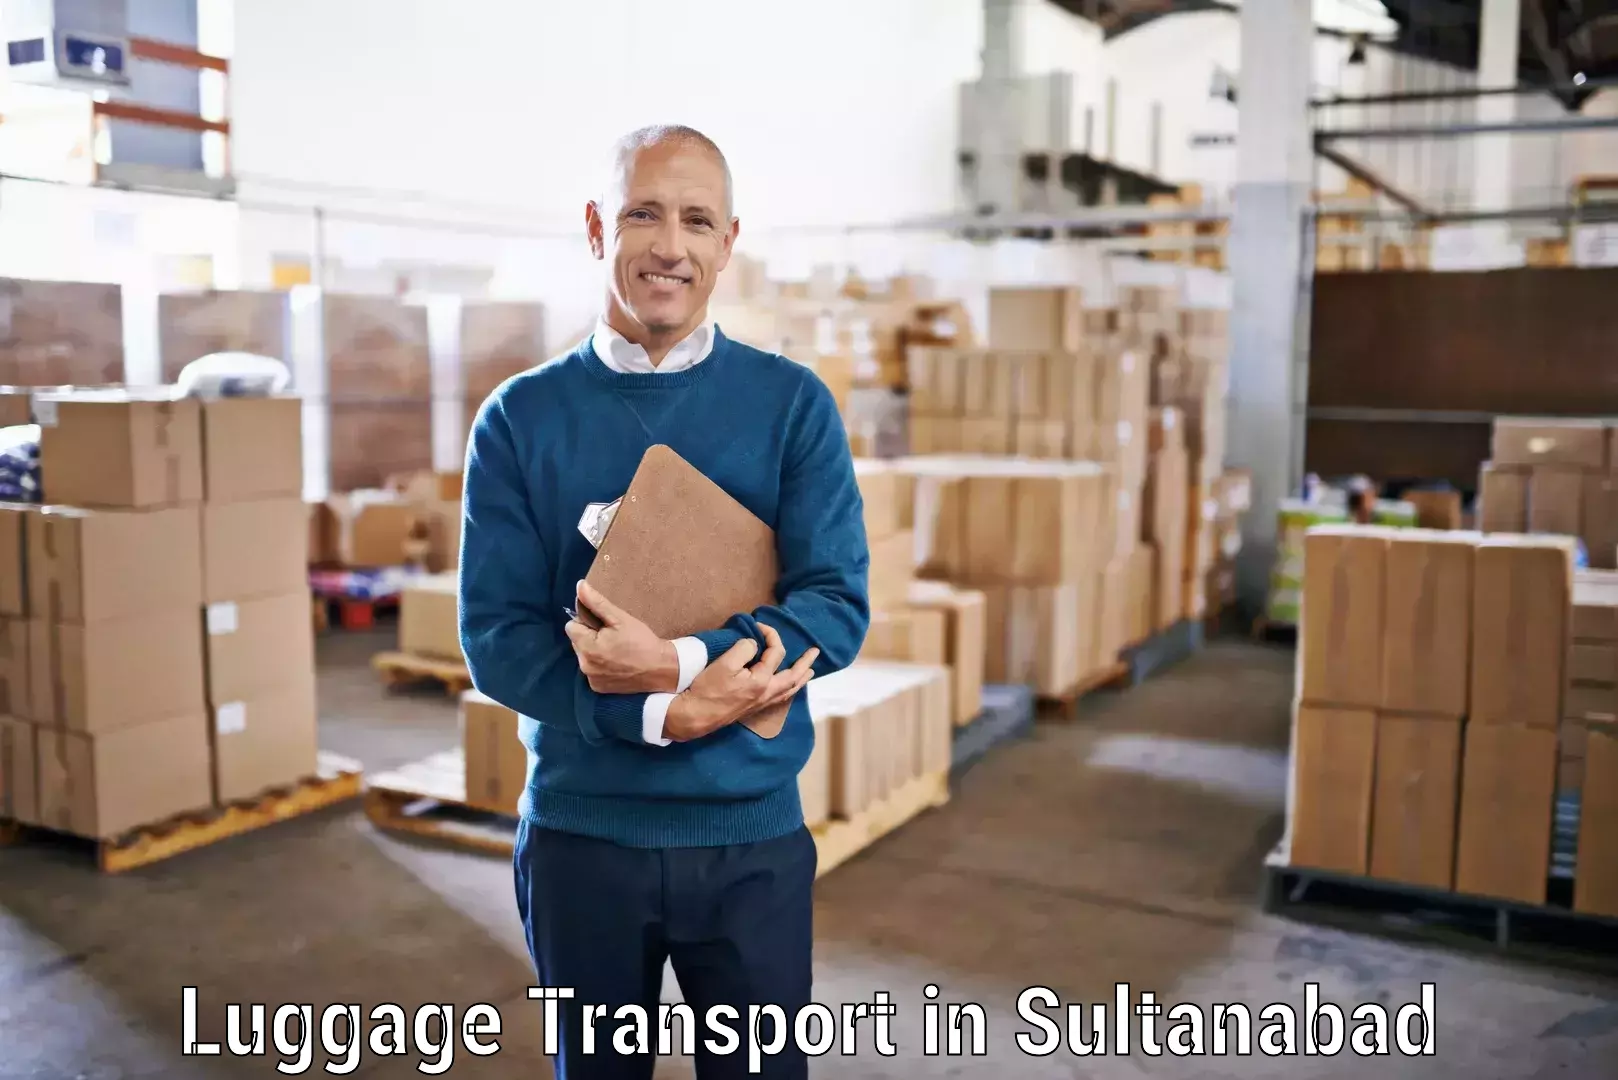 Instant baggage transport quote in Sultanabad